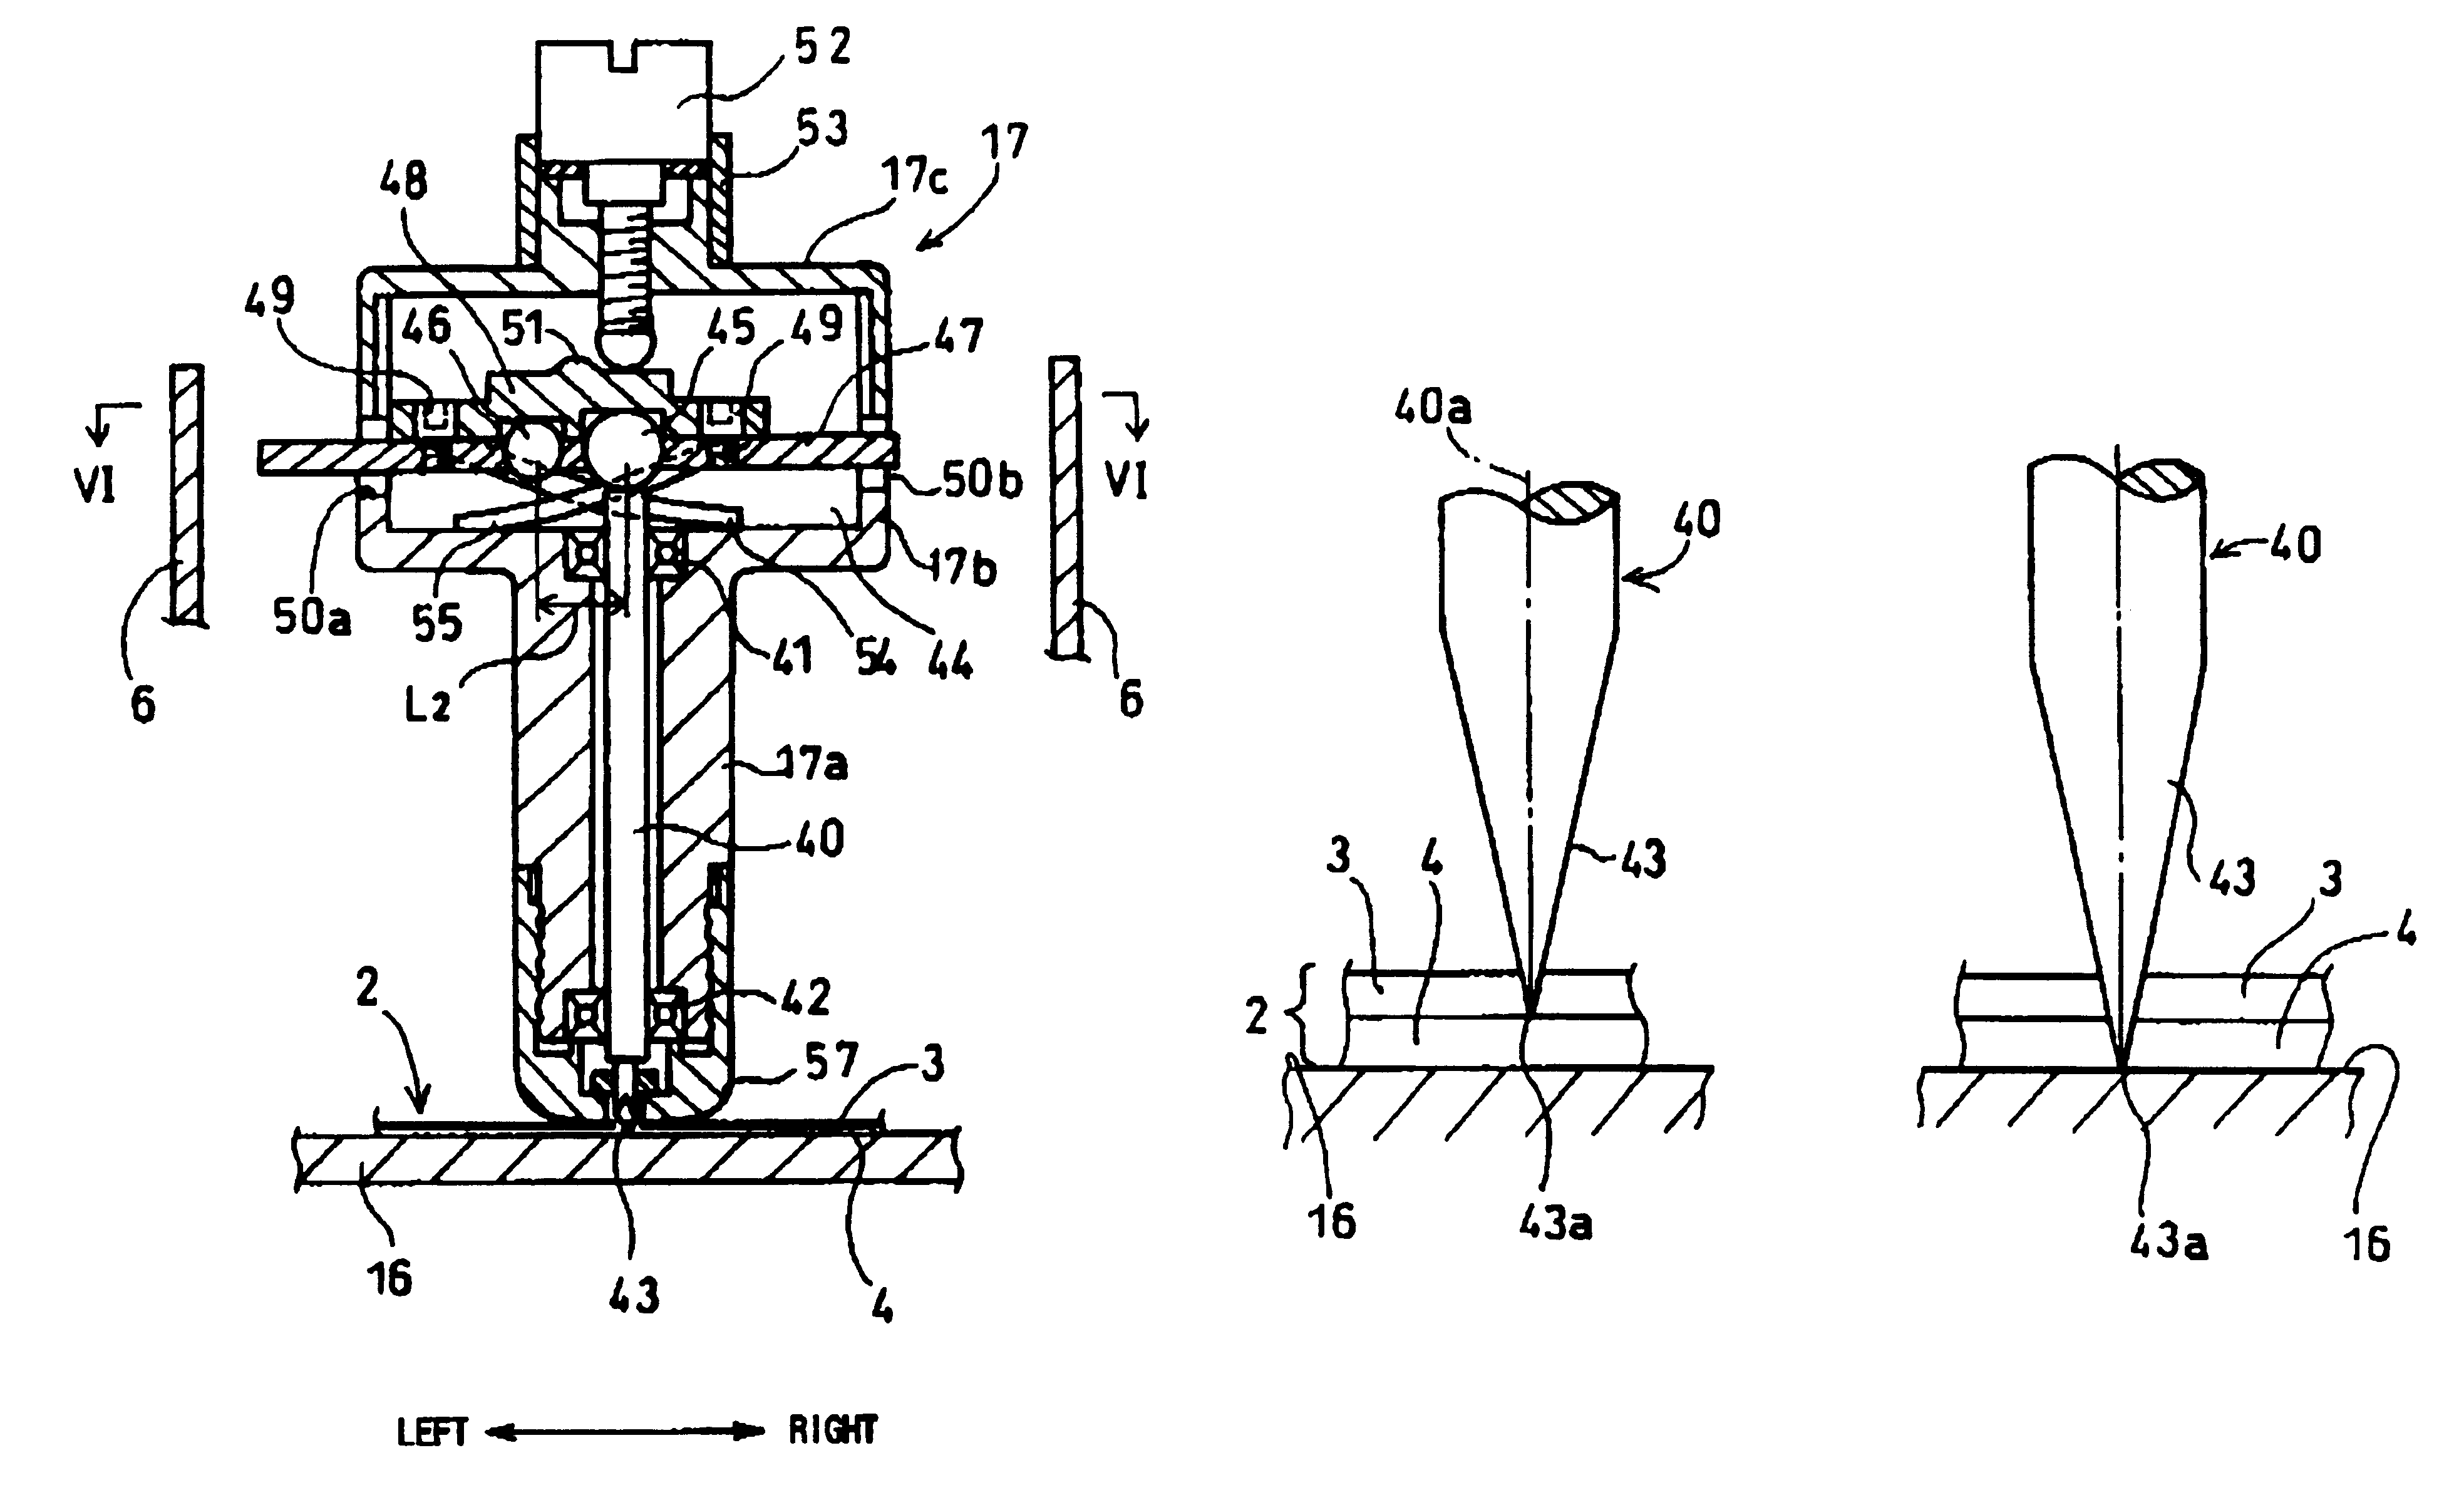 Device for adjusting distance of cutting blade from workpiece sheet